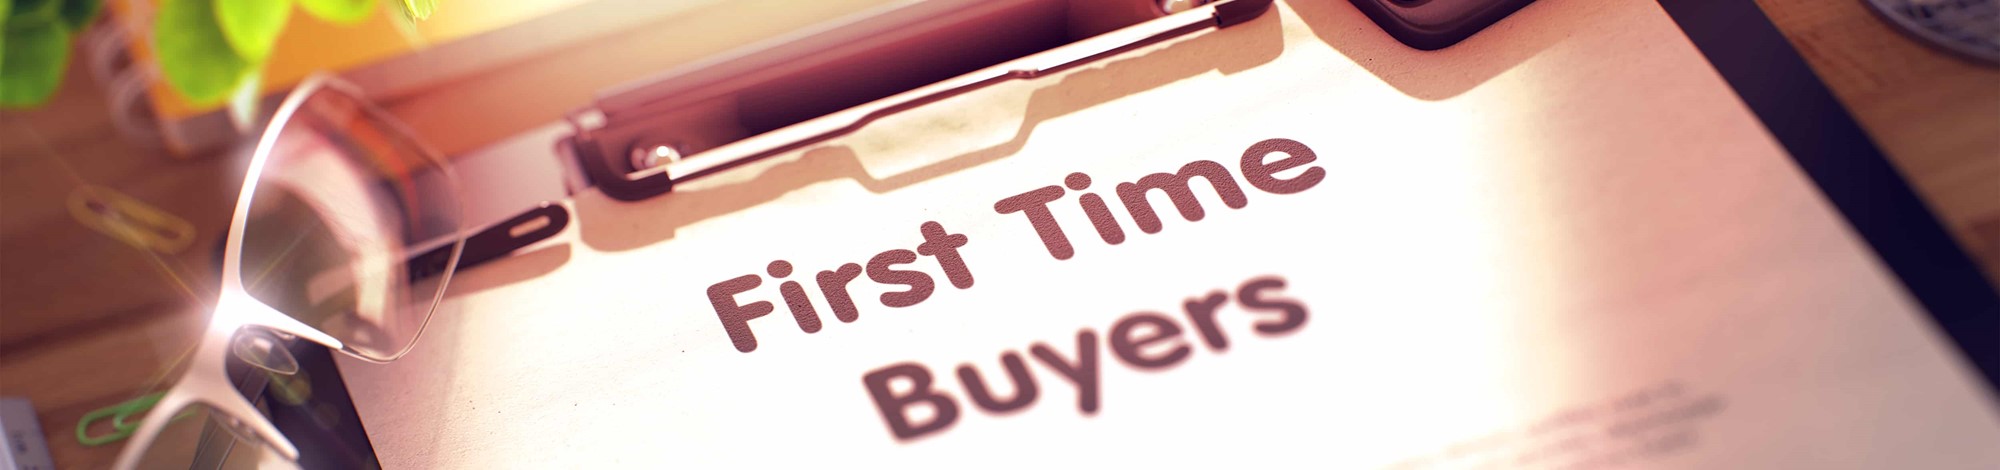 First Home Essentials Checklist for First Time Buyers UK